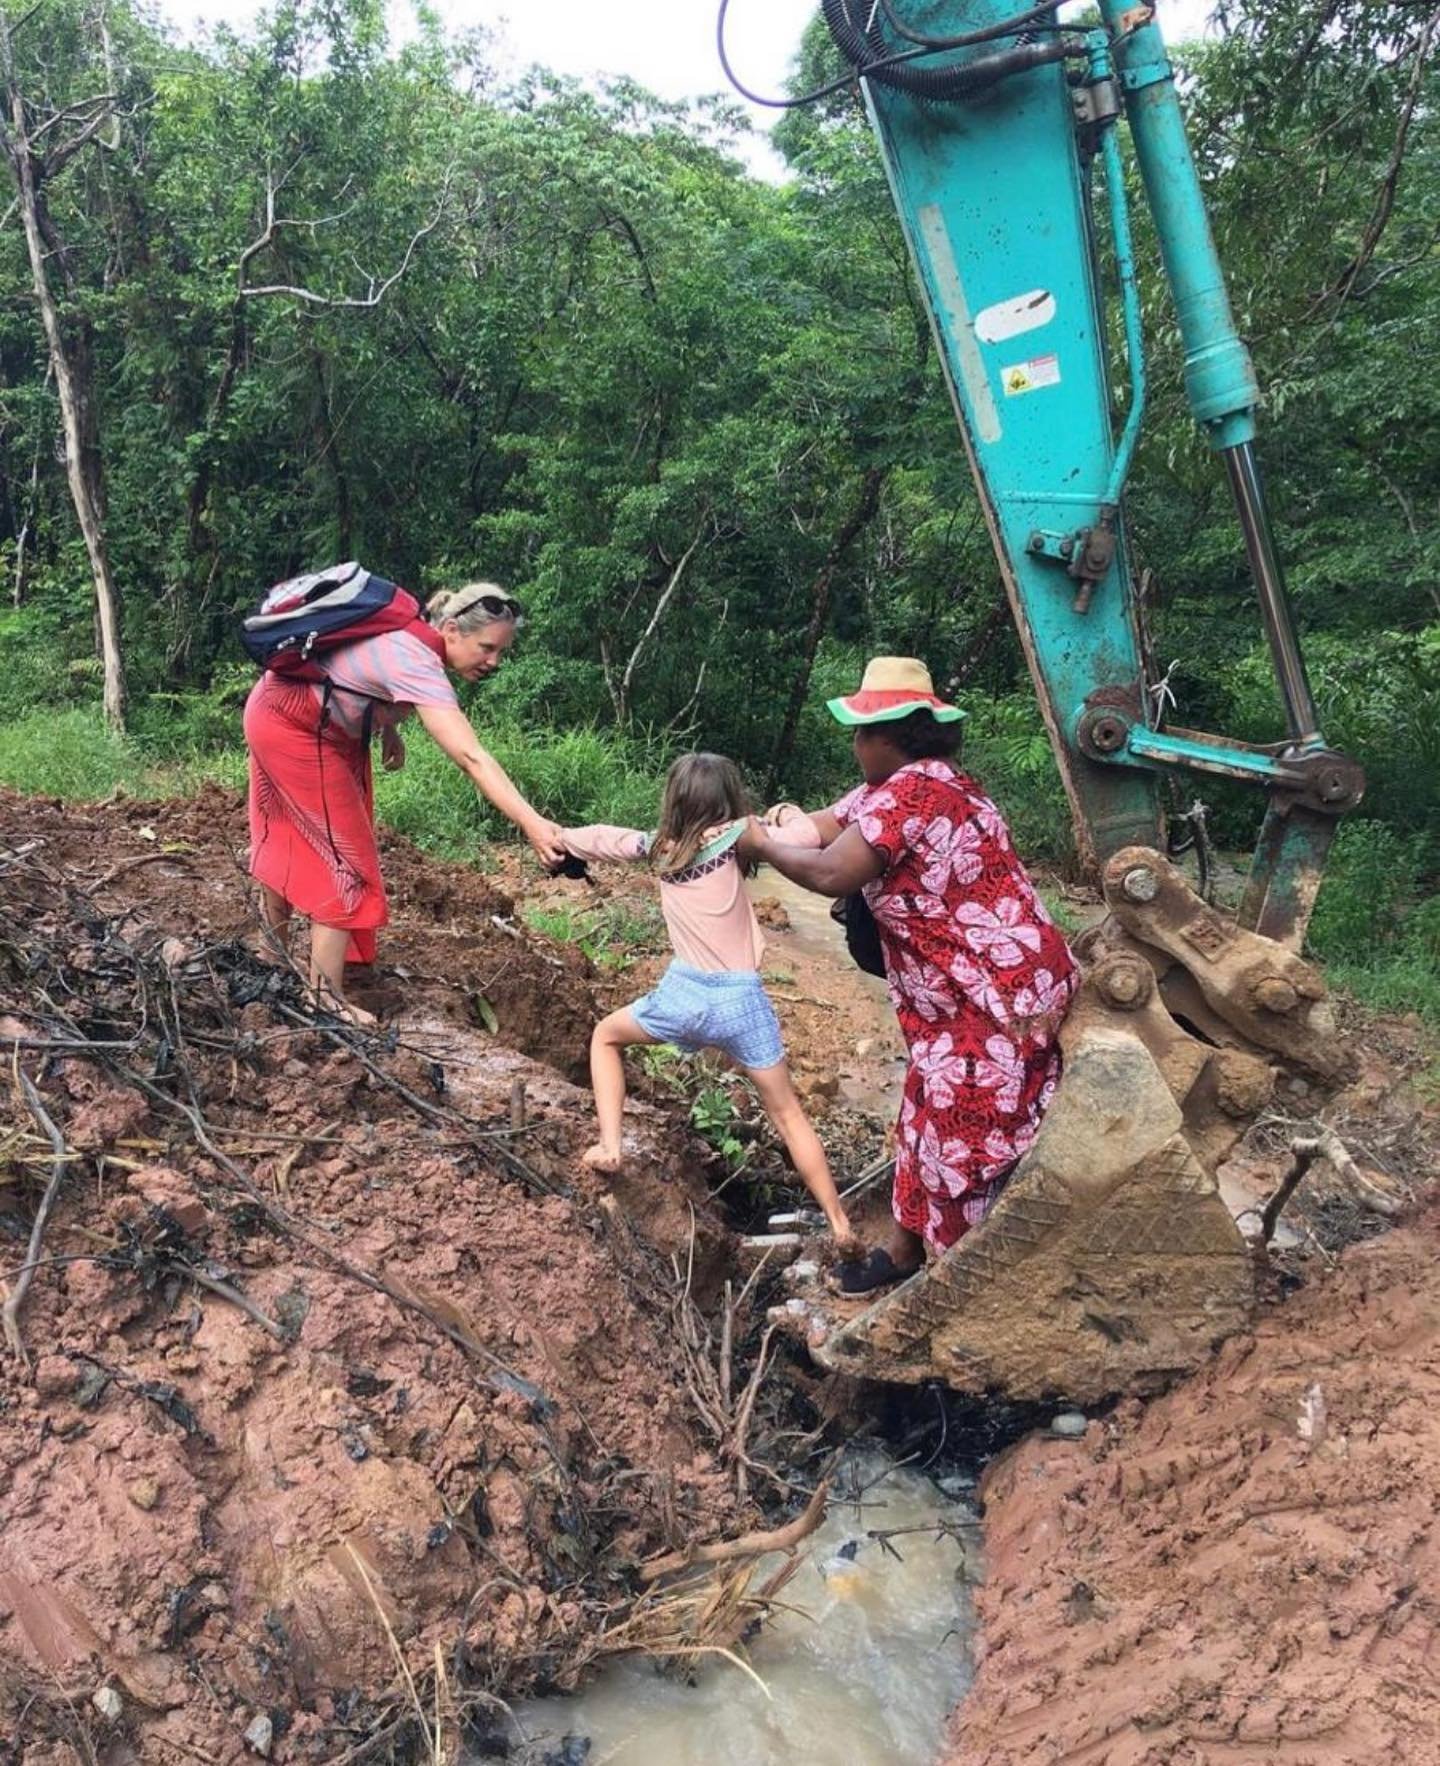 They say seeing is believing!

This photo shows just how far the Fiji Book Drive team will go for our work supporting literacy in Fiji. 

When visiting a school on the island of Kadavu, the only way of crossing the ditch was to hitch a ride in the ex